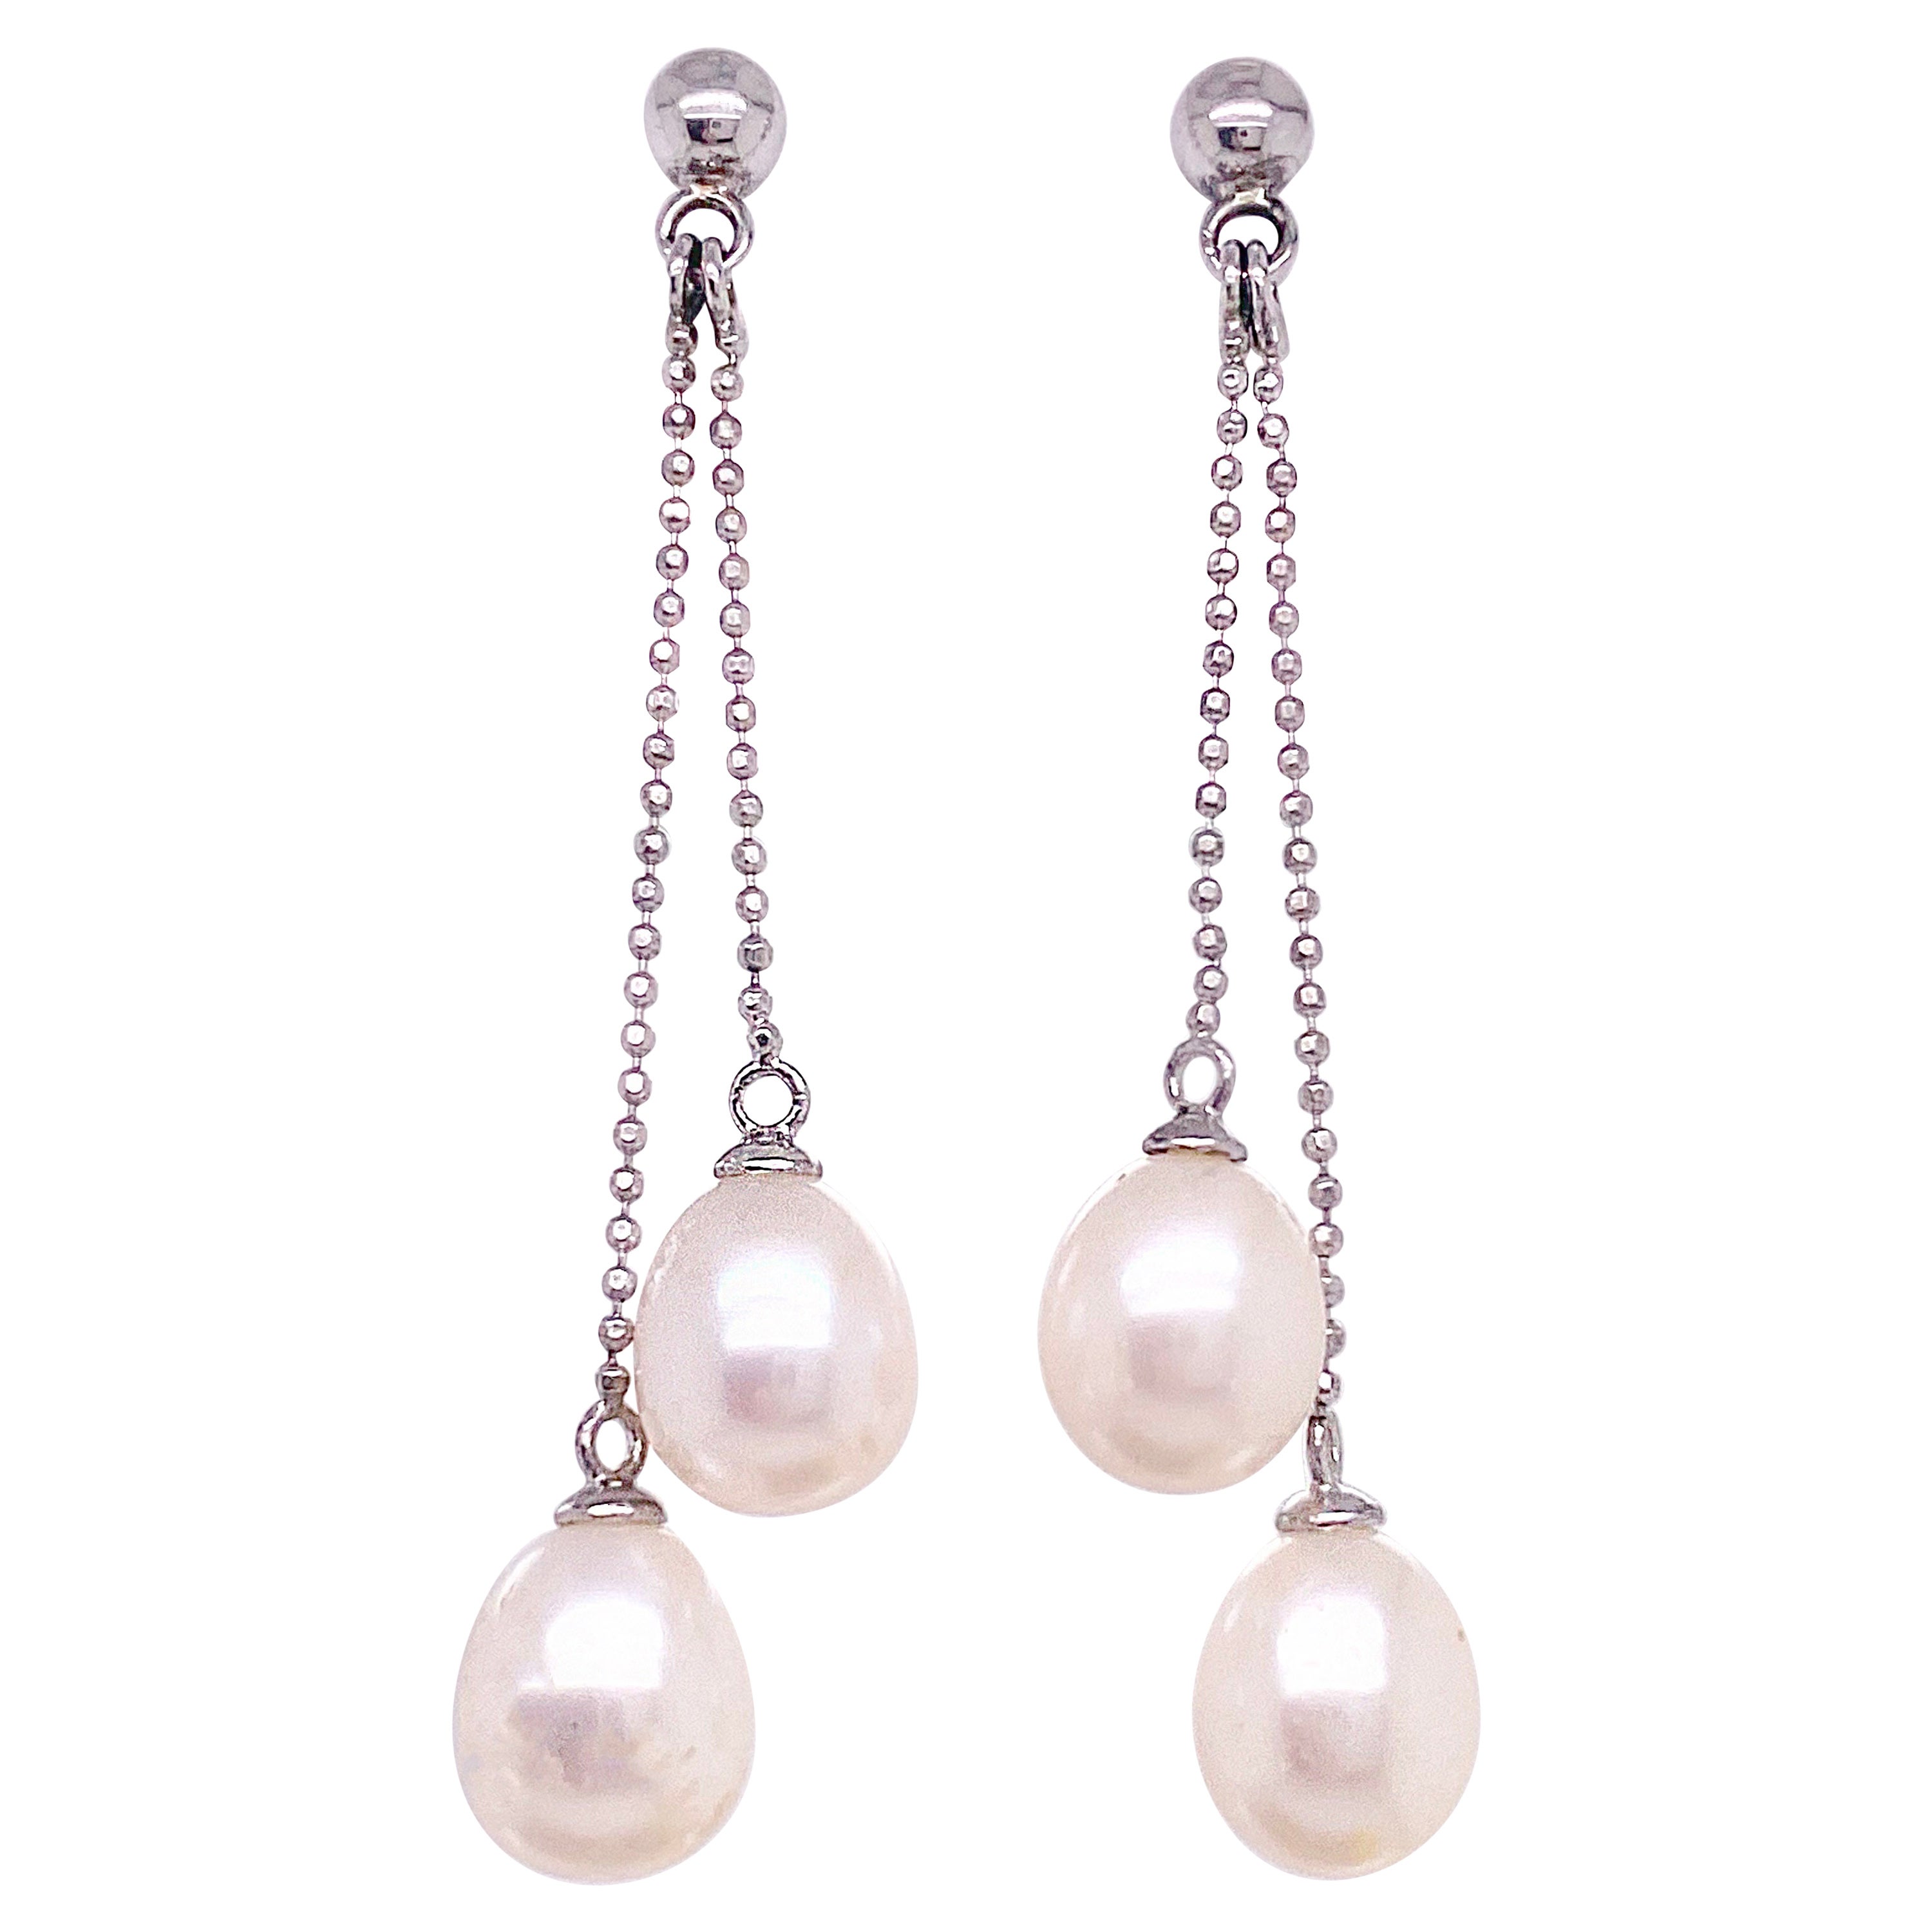 Double Pearl Dangle Earrings, Two Stand Dangle High Luster Cultured Pearls